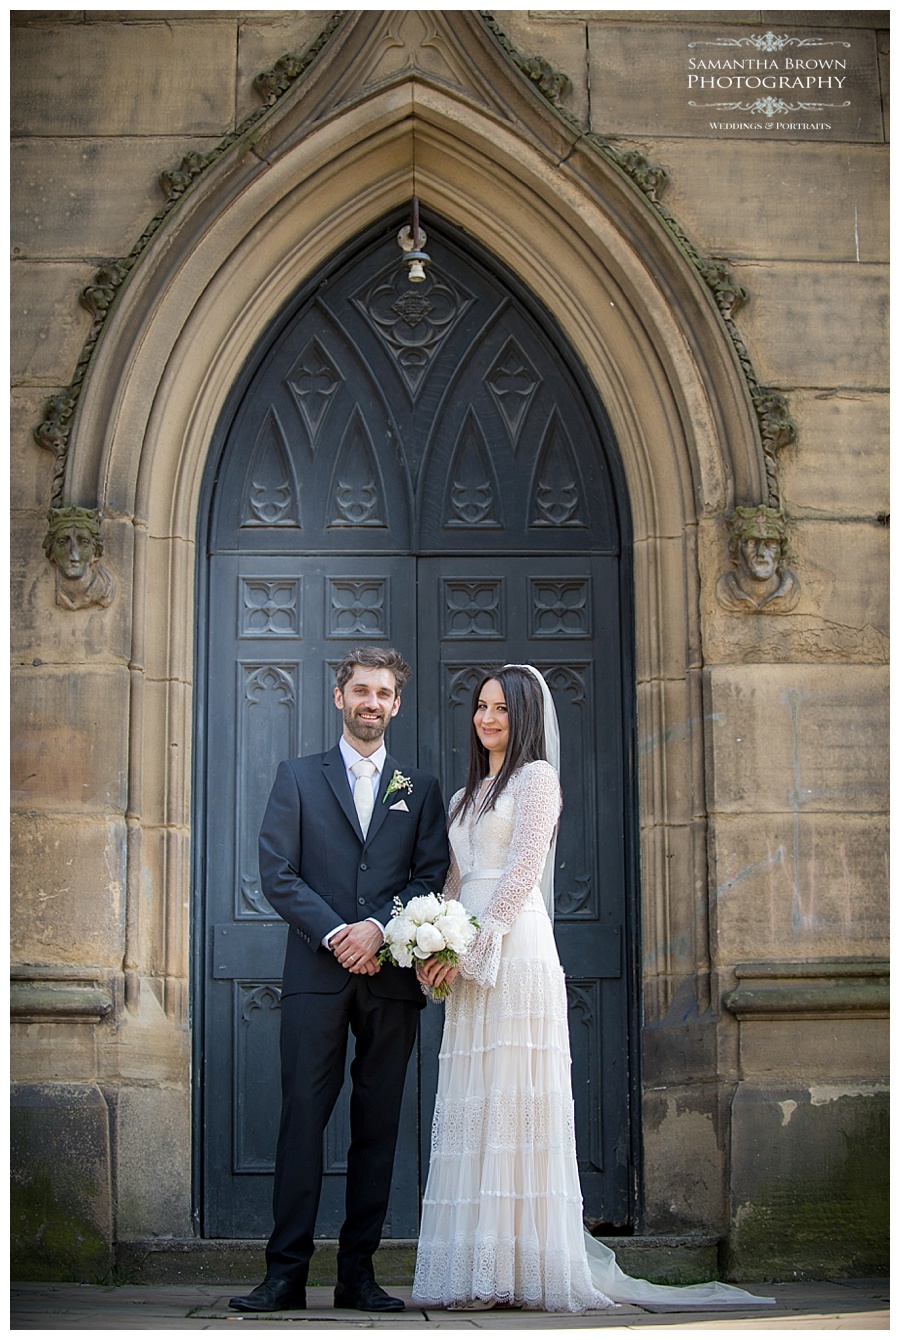 St Lukes Bombed out Church Liverpool bride and groom on the steps